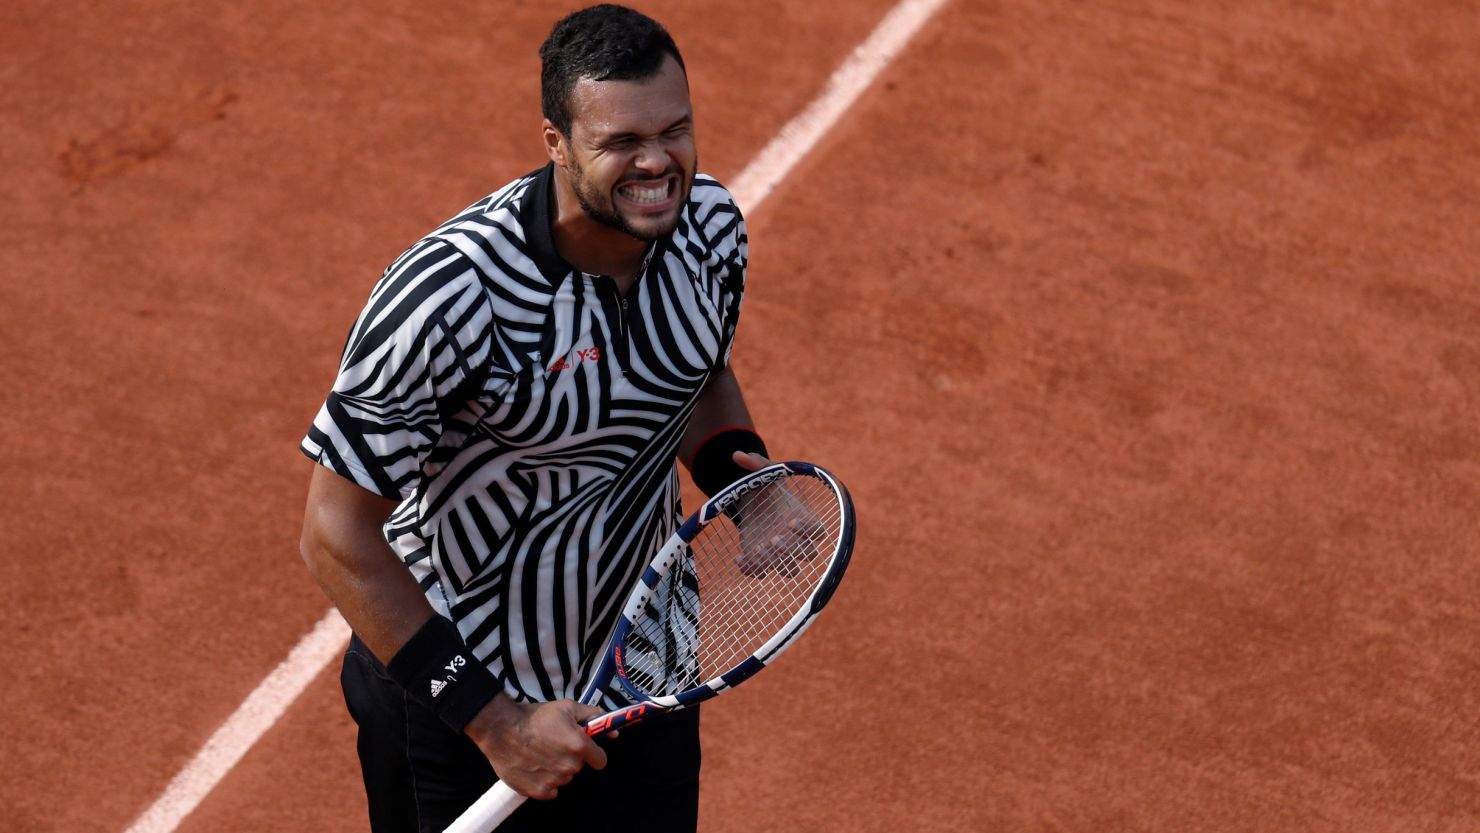 Tsonga was forced to retire despite leading 5-2 in the opening set.